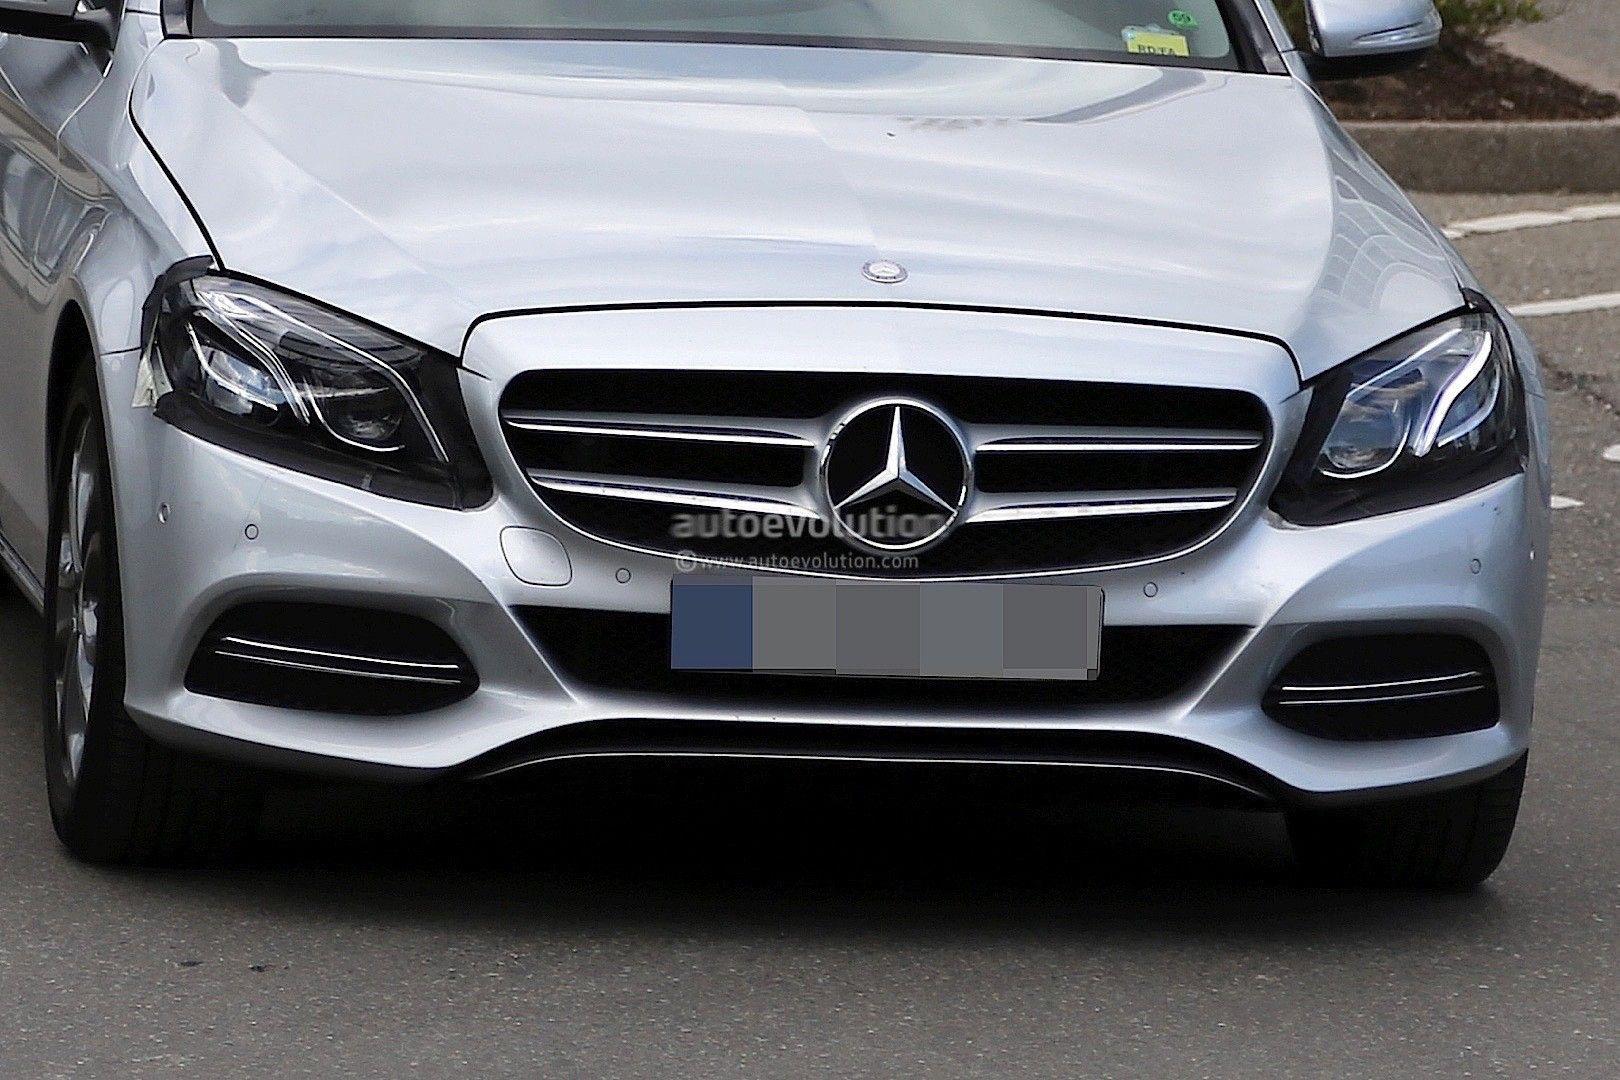 Mercedes Benz C Class Facelift Spied In Germany